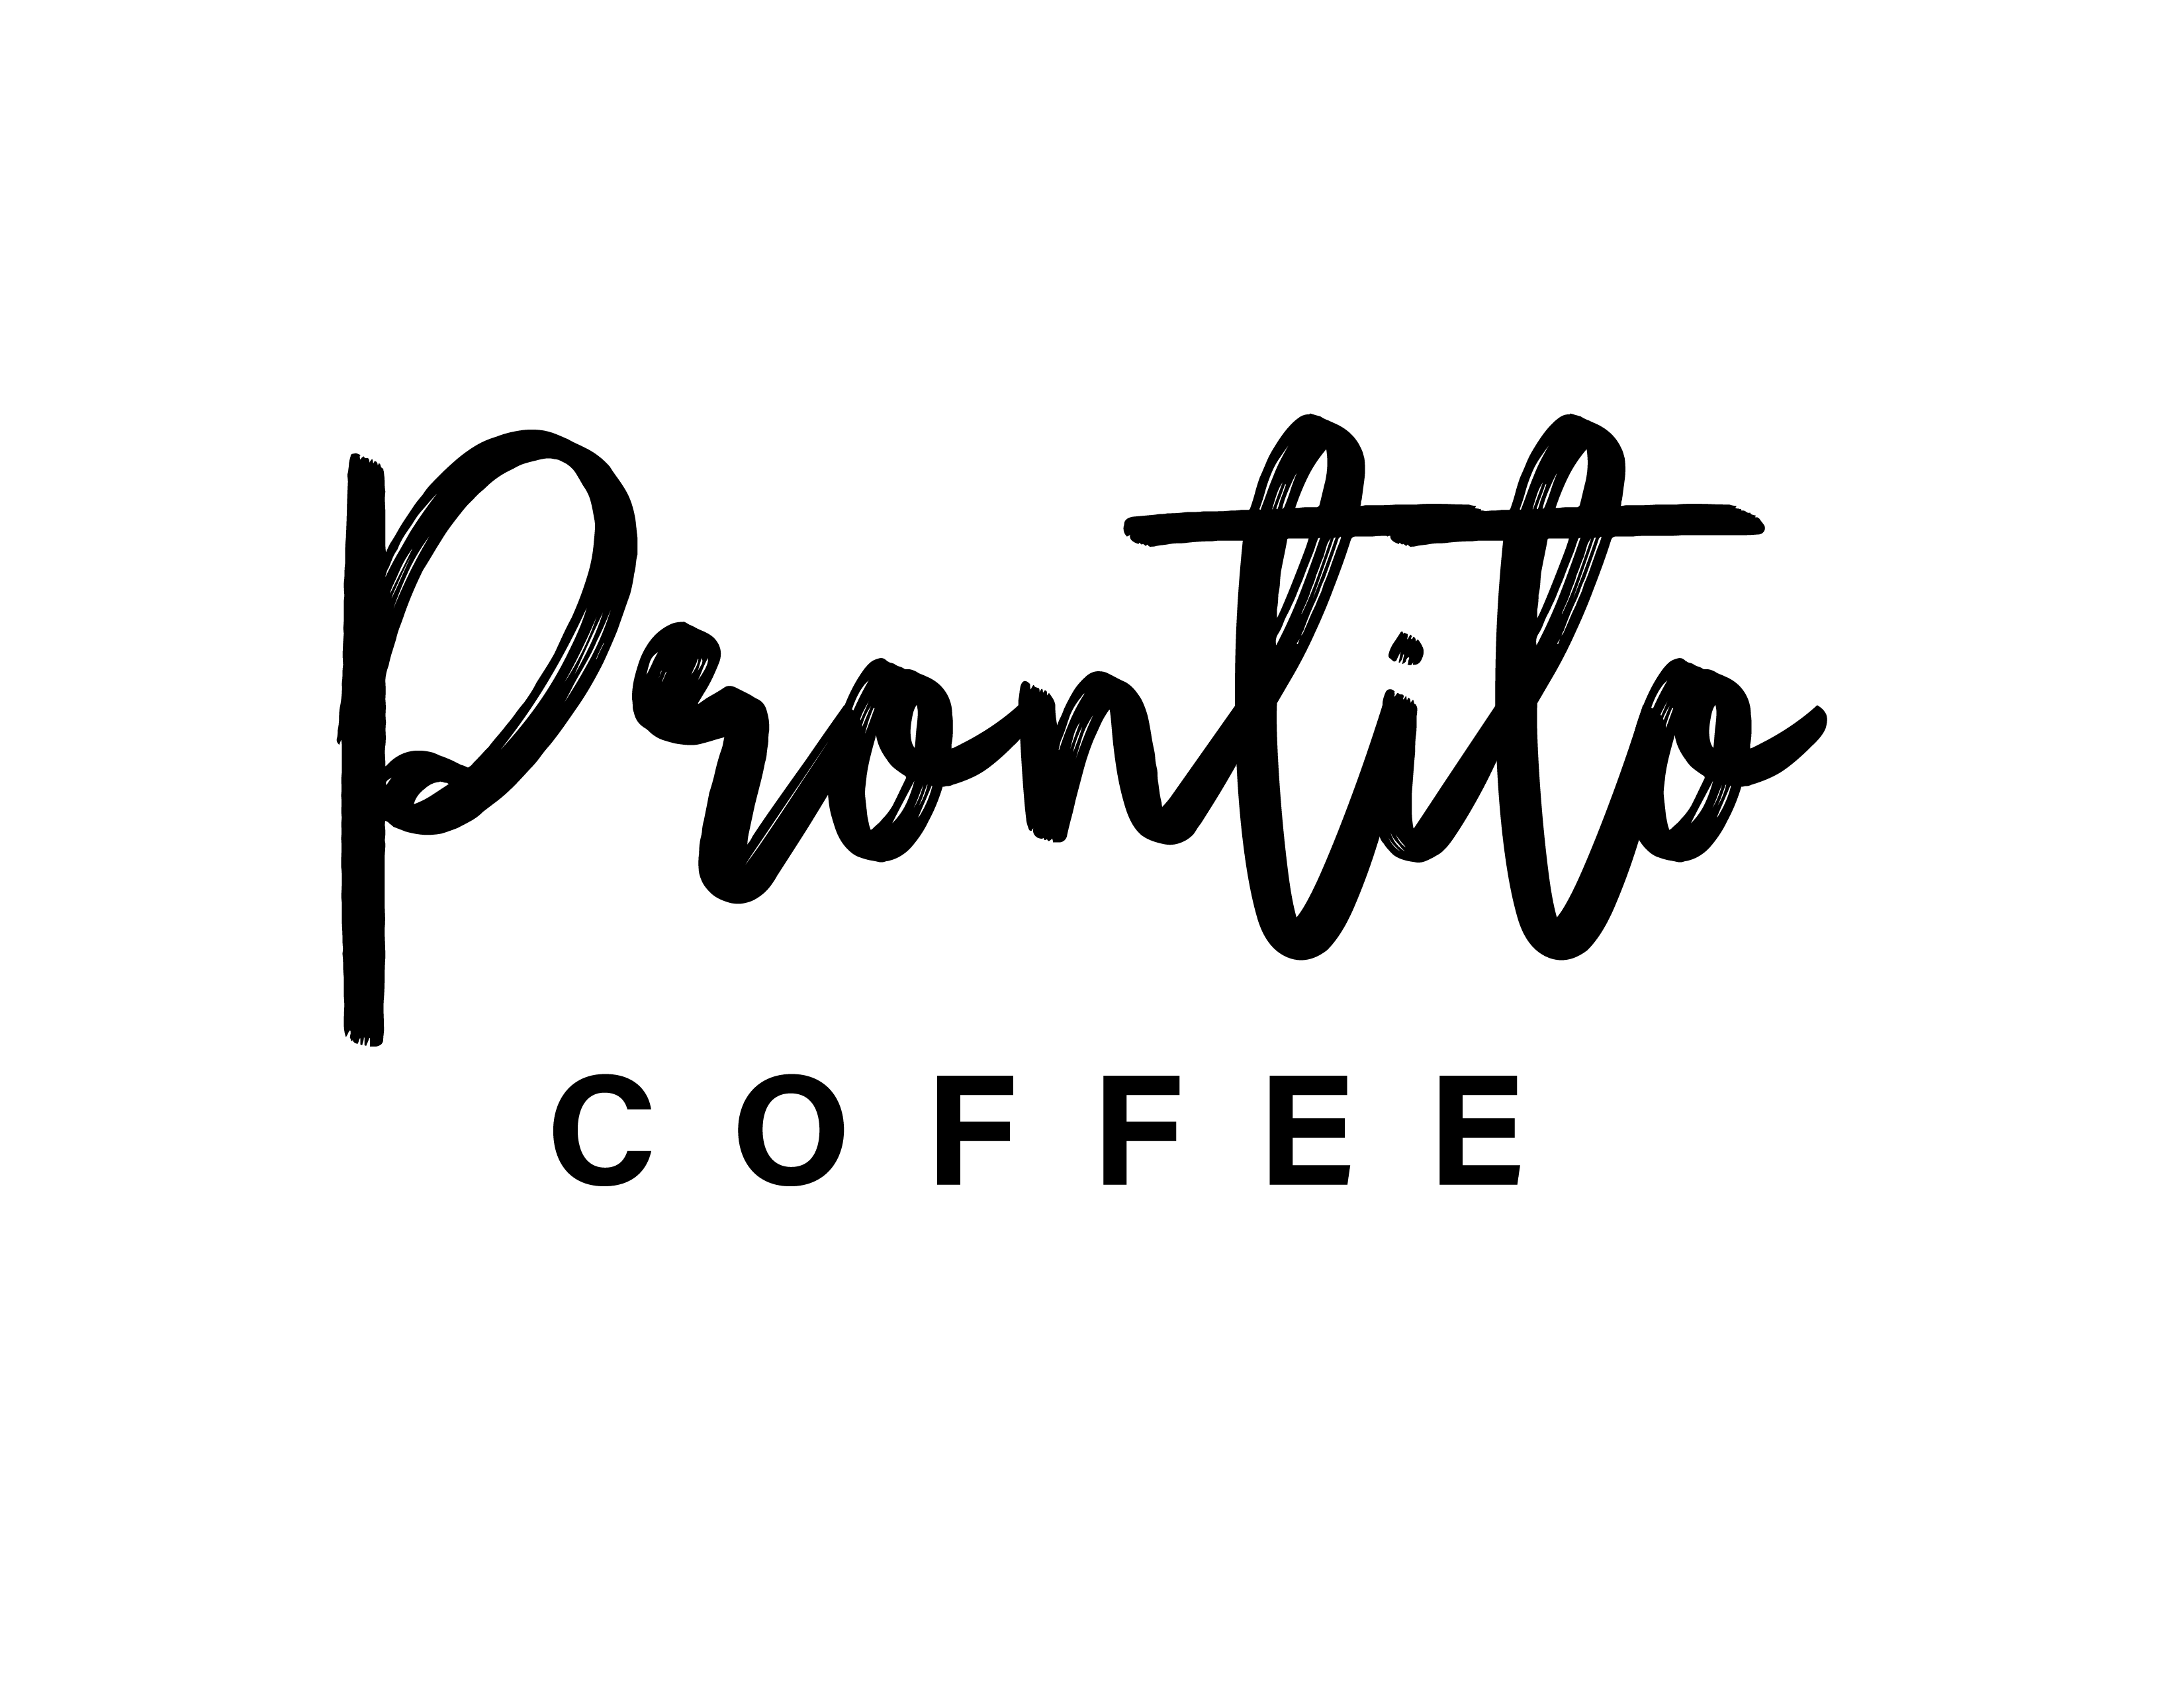 Prontito Coffee Logo logo design by logo designer Robot Agency Studios for your inspiration and for the worlds largest logo competition